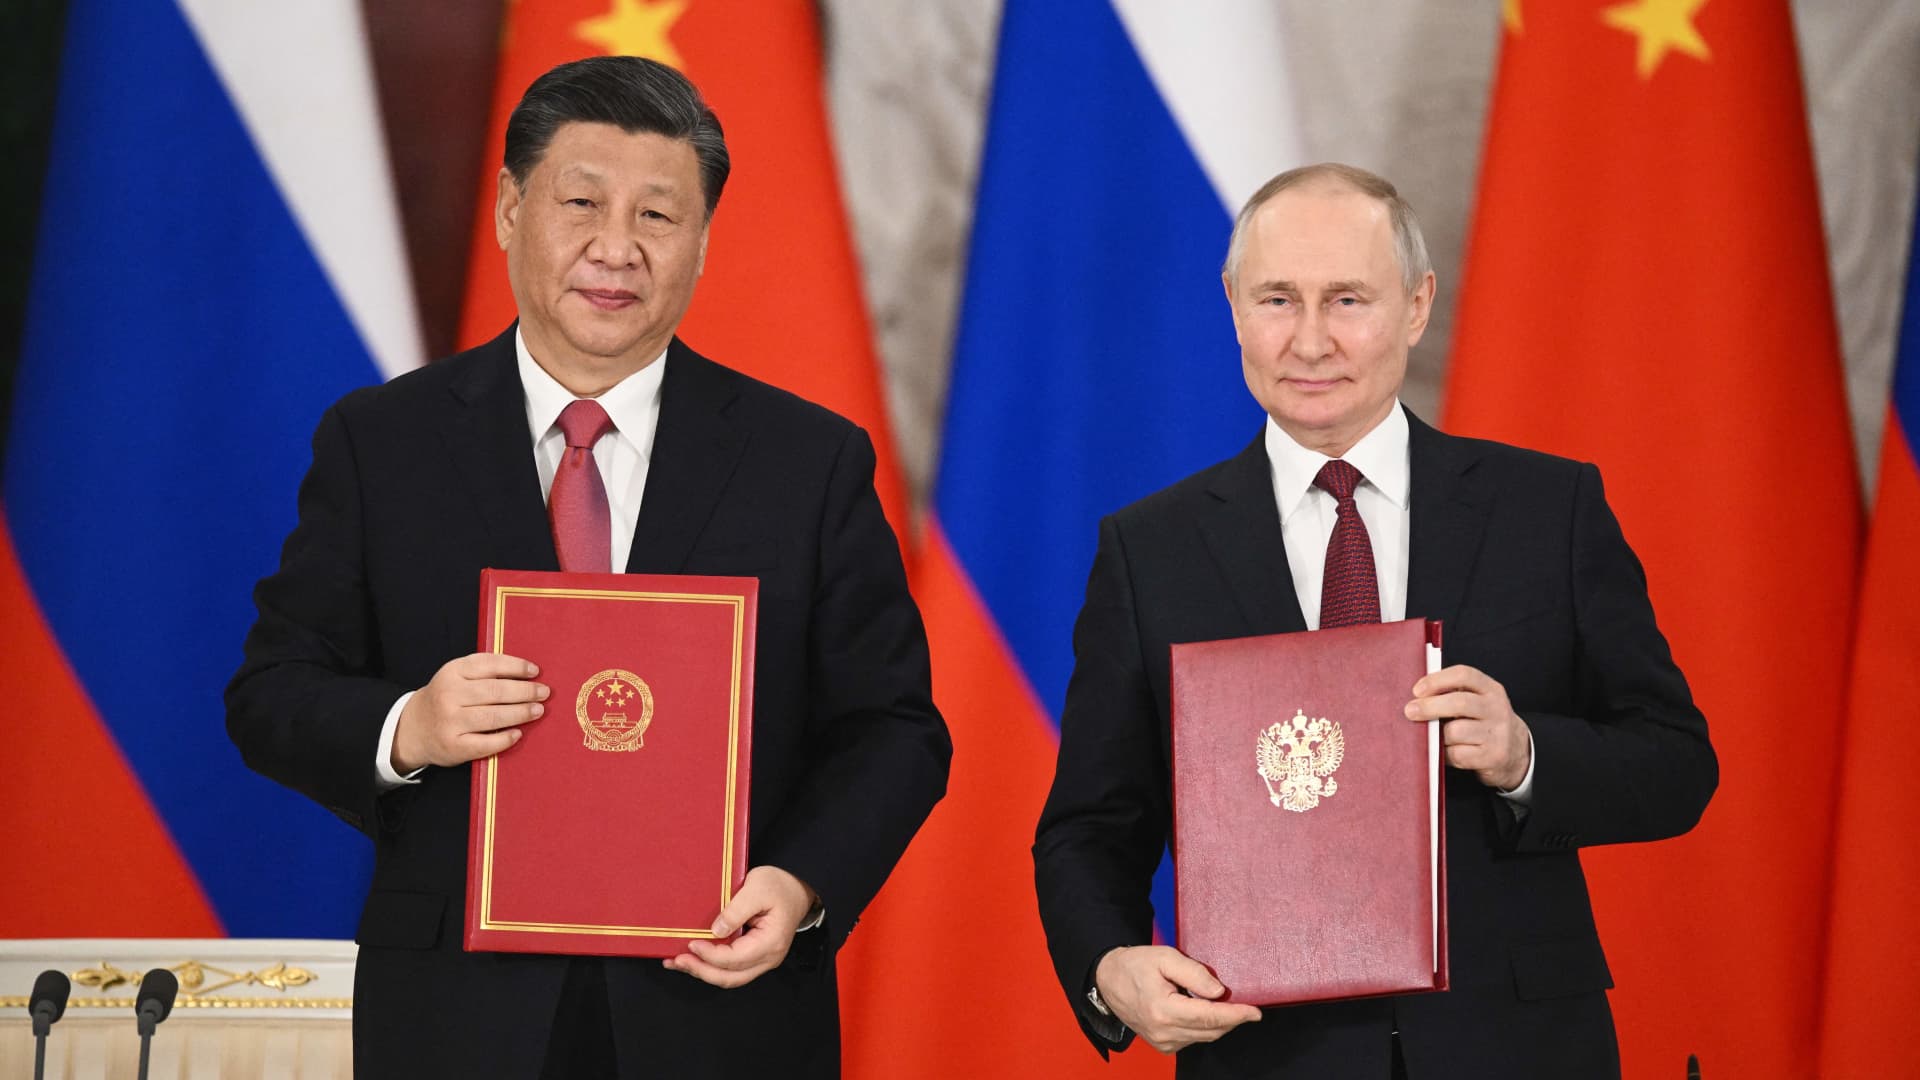 Russian President Vladimir Putin and China's President Xi Jinping shake hands during a signing ceremony following their talks at the Kremlin in Moscow on March 21, 2023. 